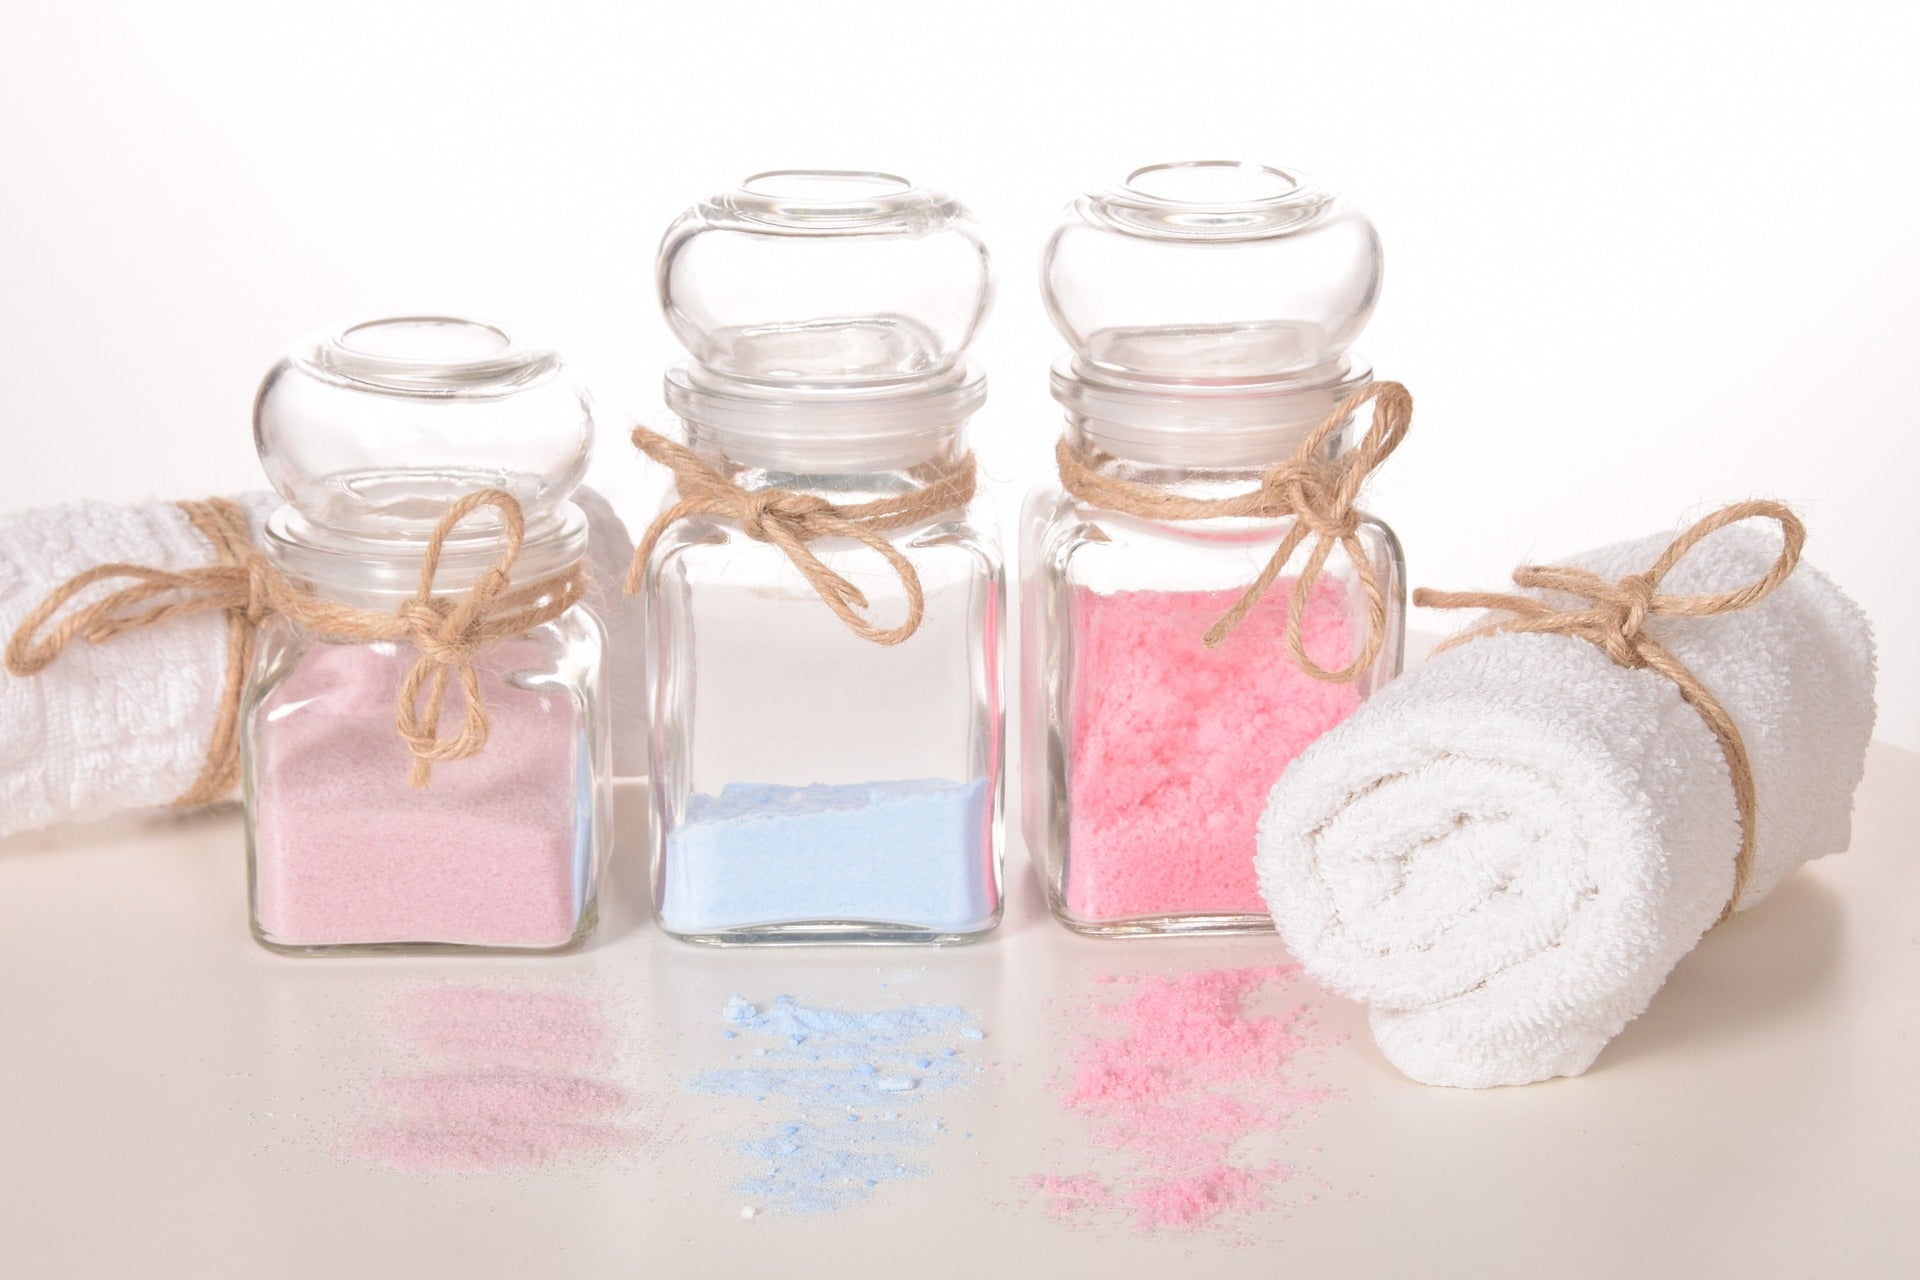 Aroma bath salts for a self-care routine